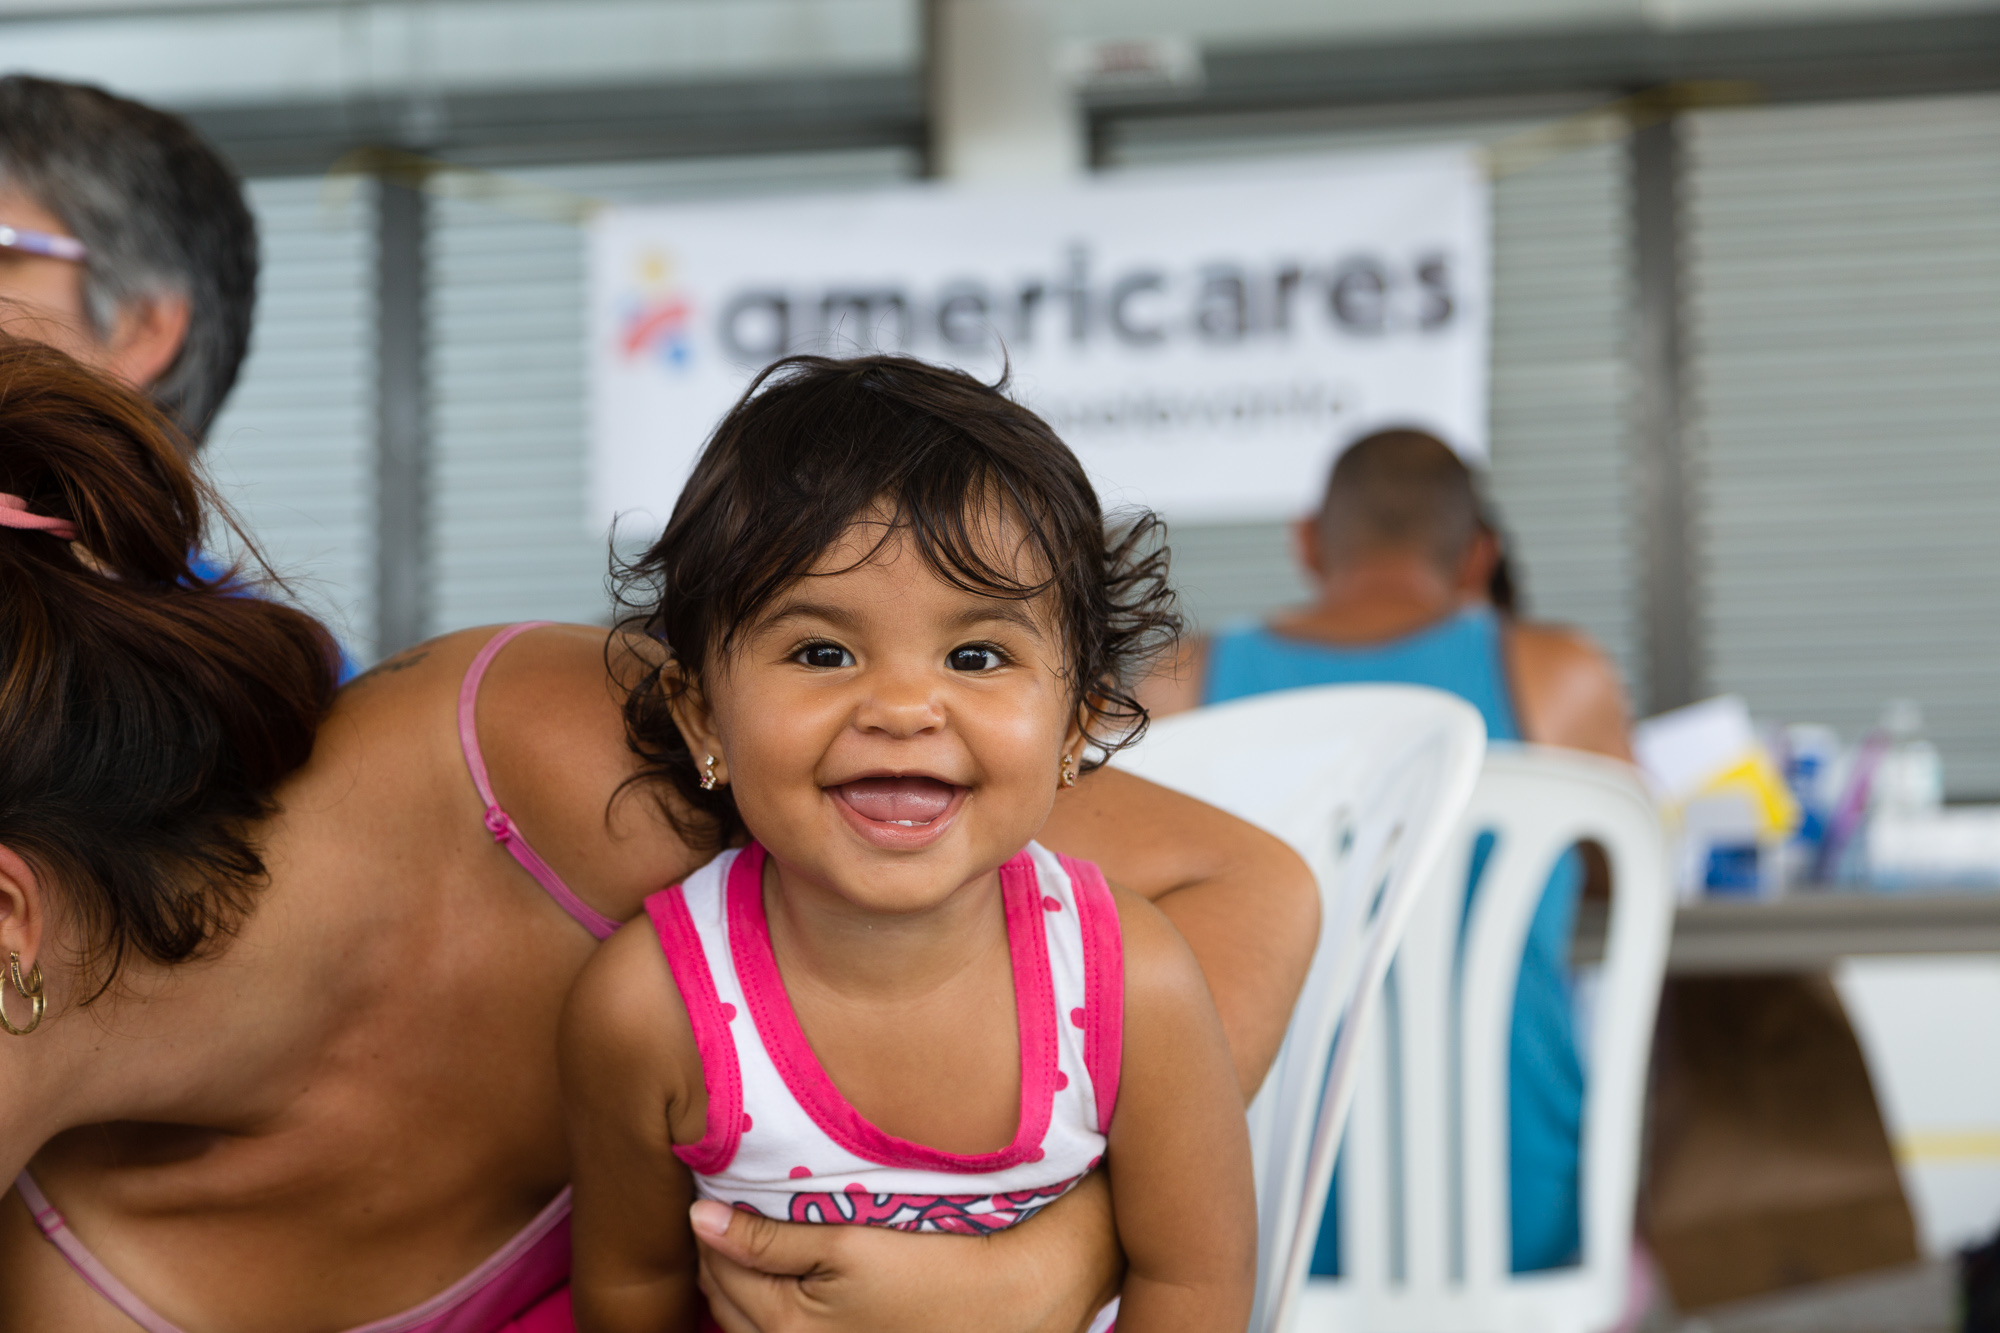 This little girl was at the temporary clinic in the mountains of central Puerto Rico for a check up.